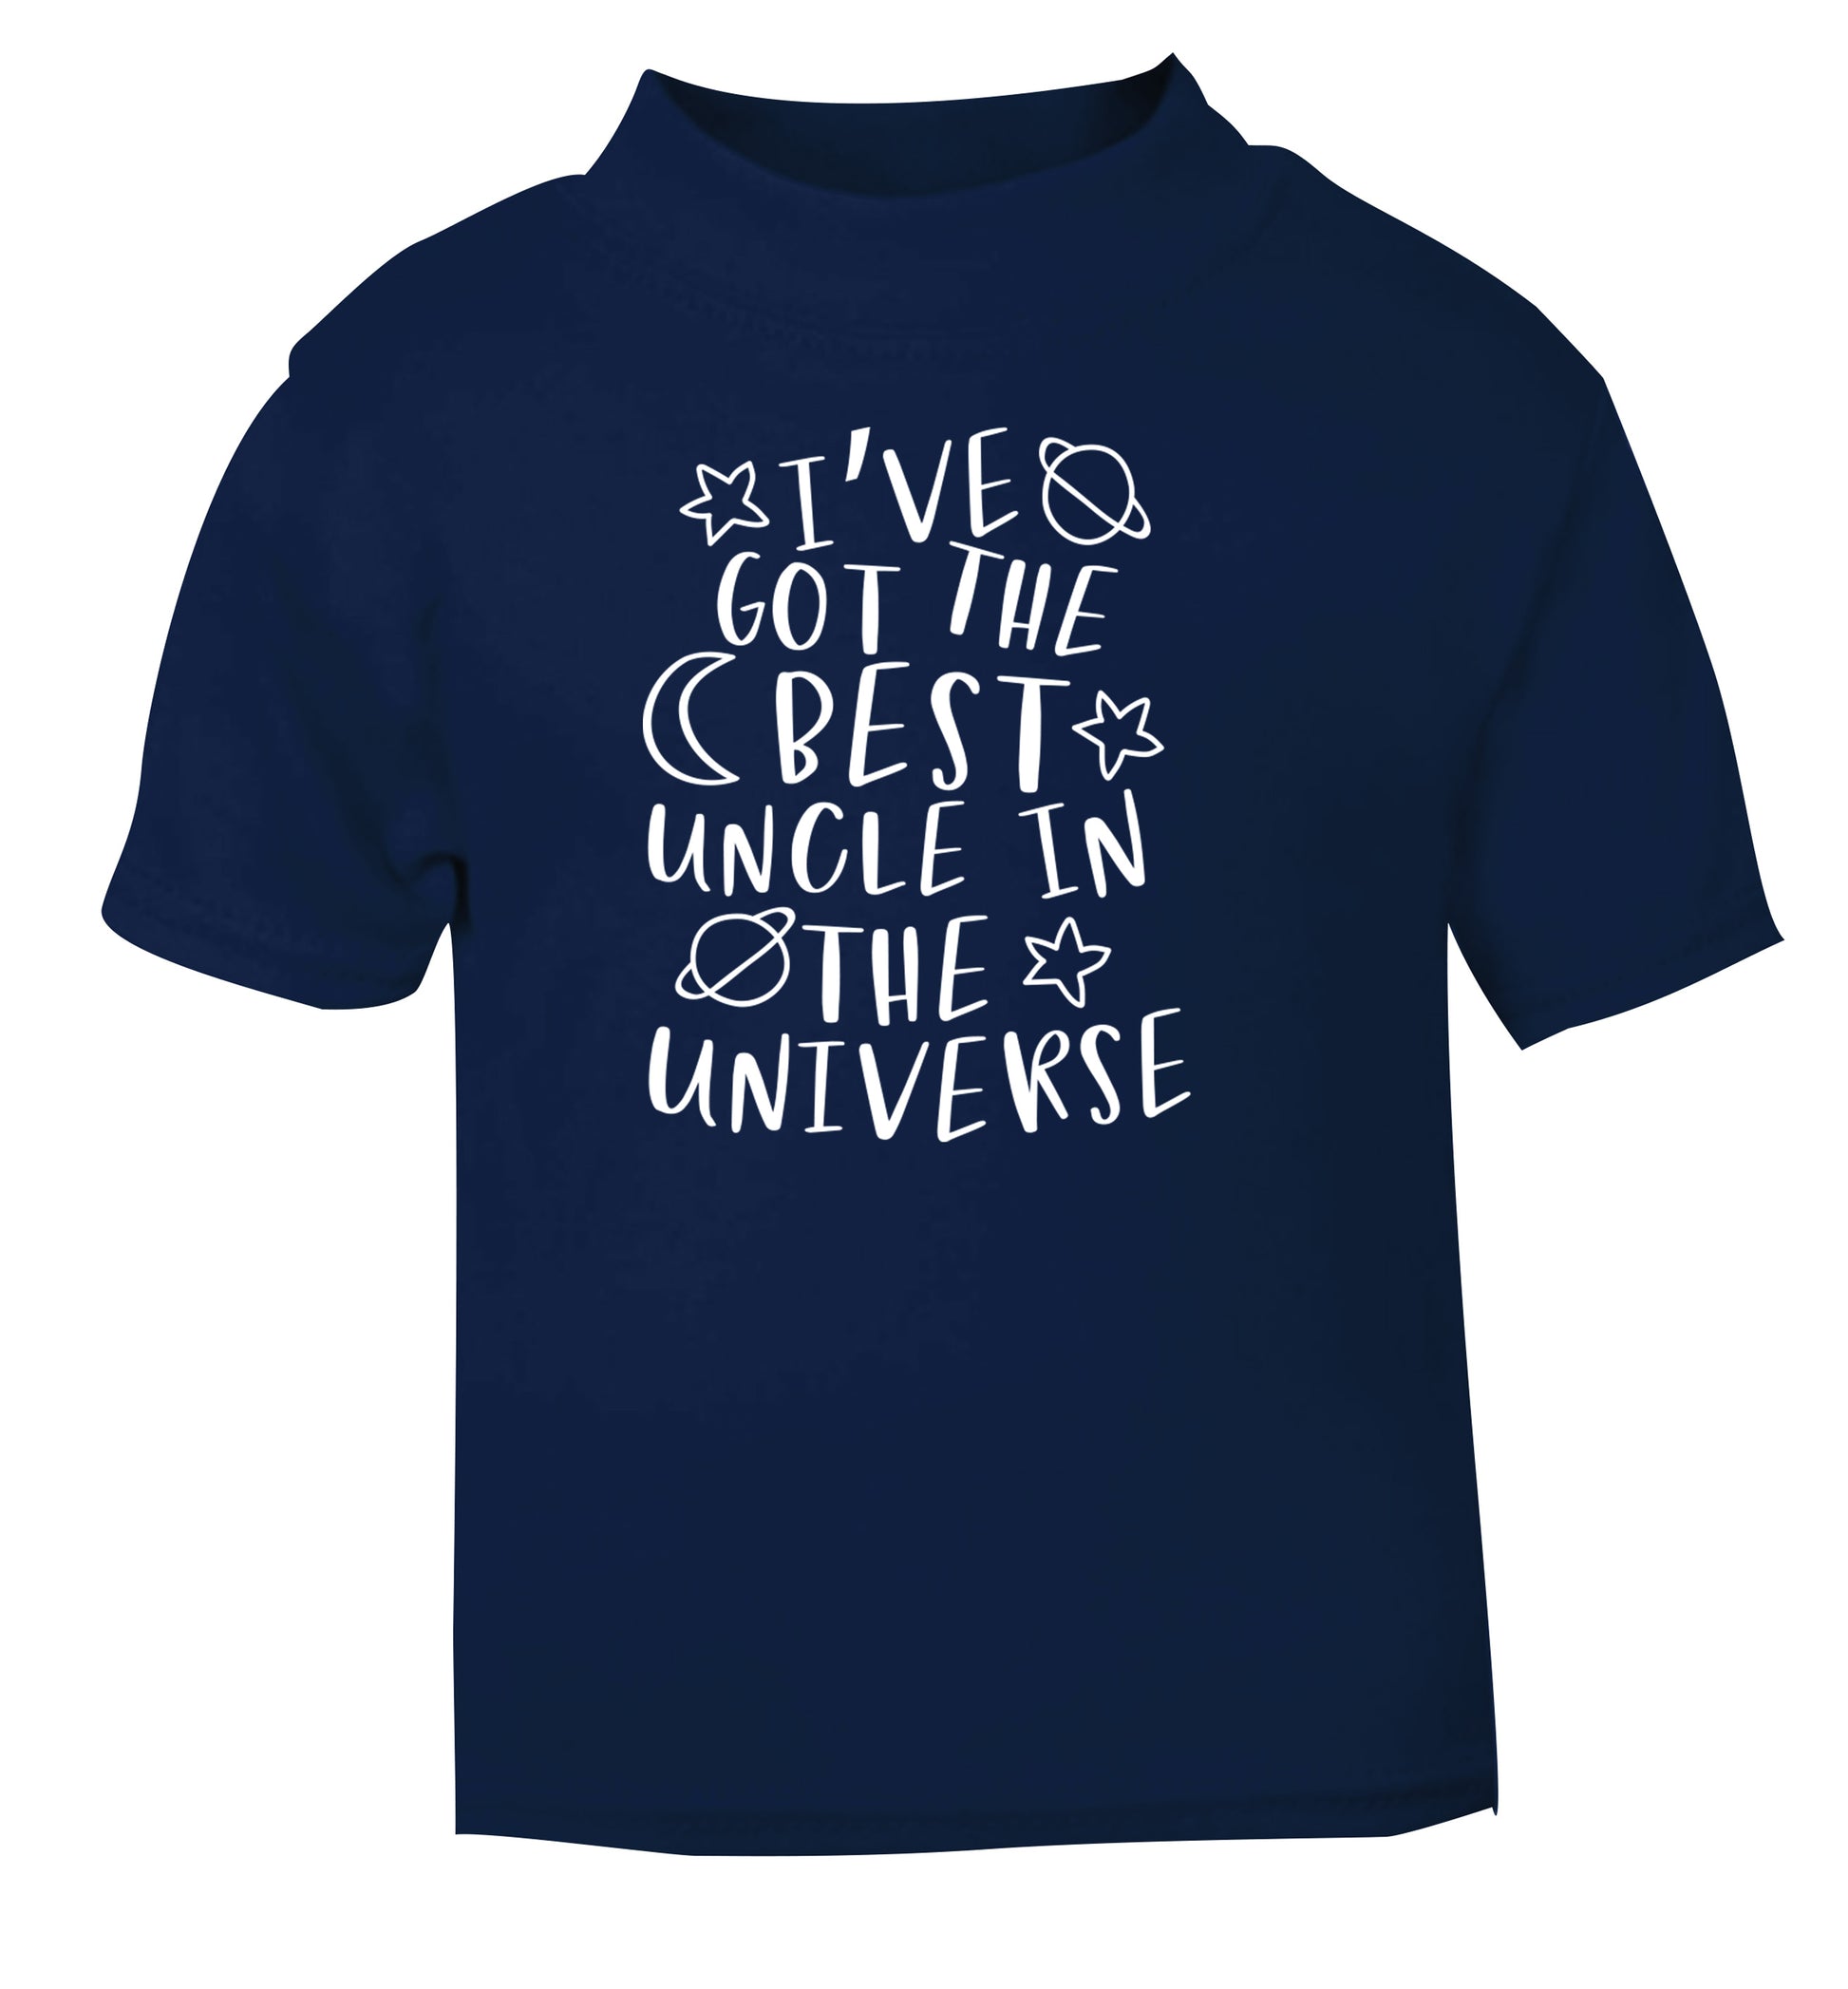 I've got the best uncle in the universe navy Baby Toddler Tshirt 2 Years